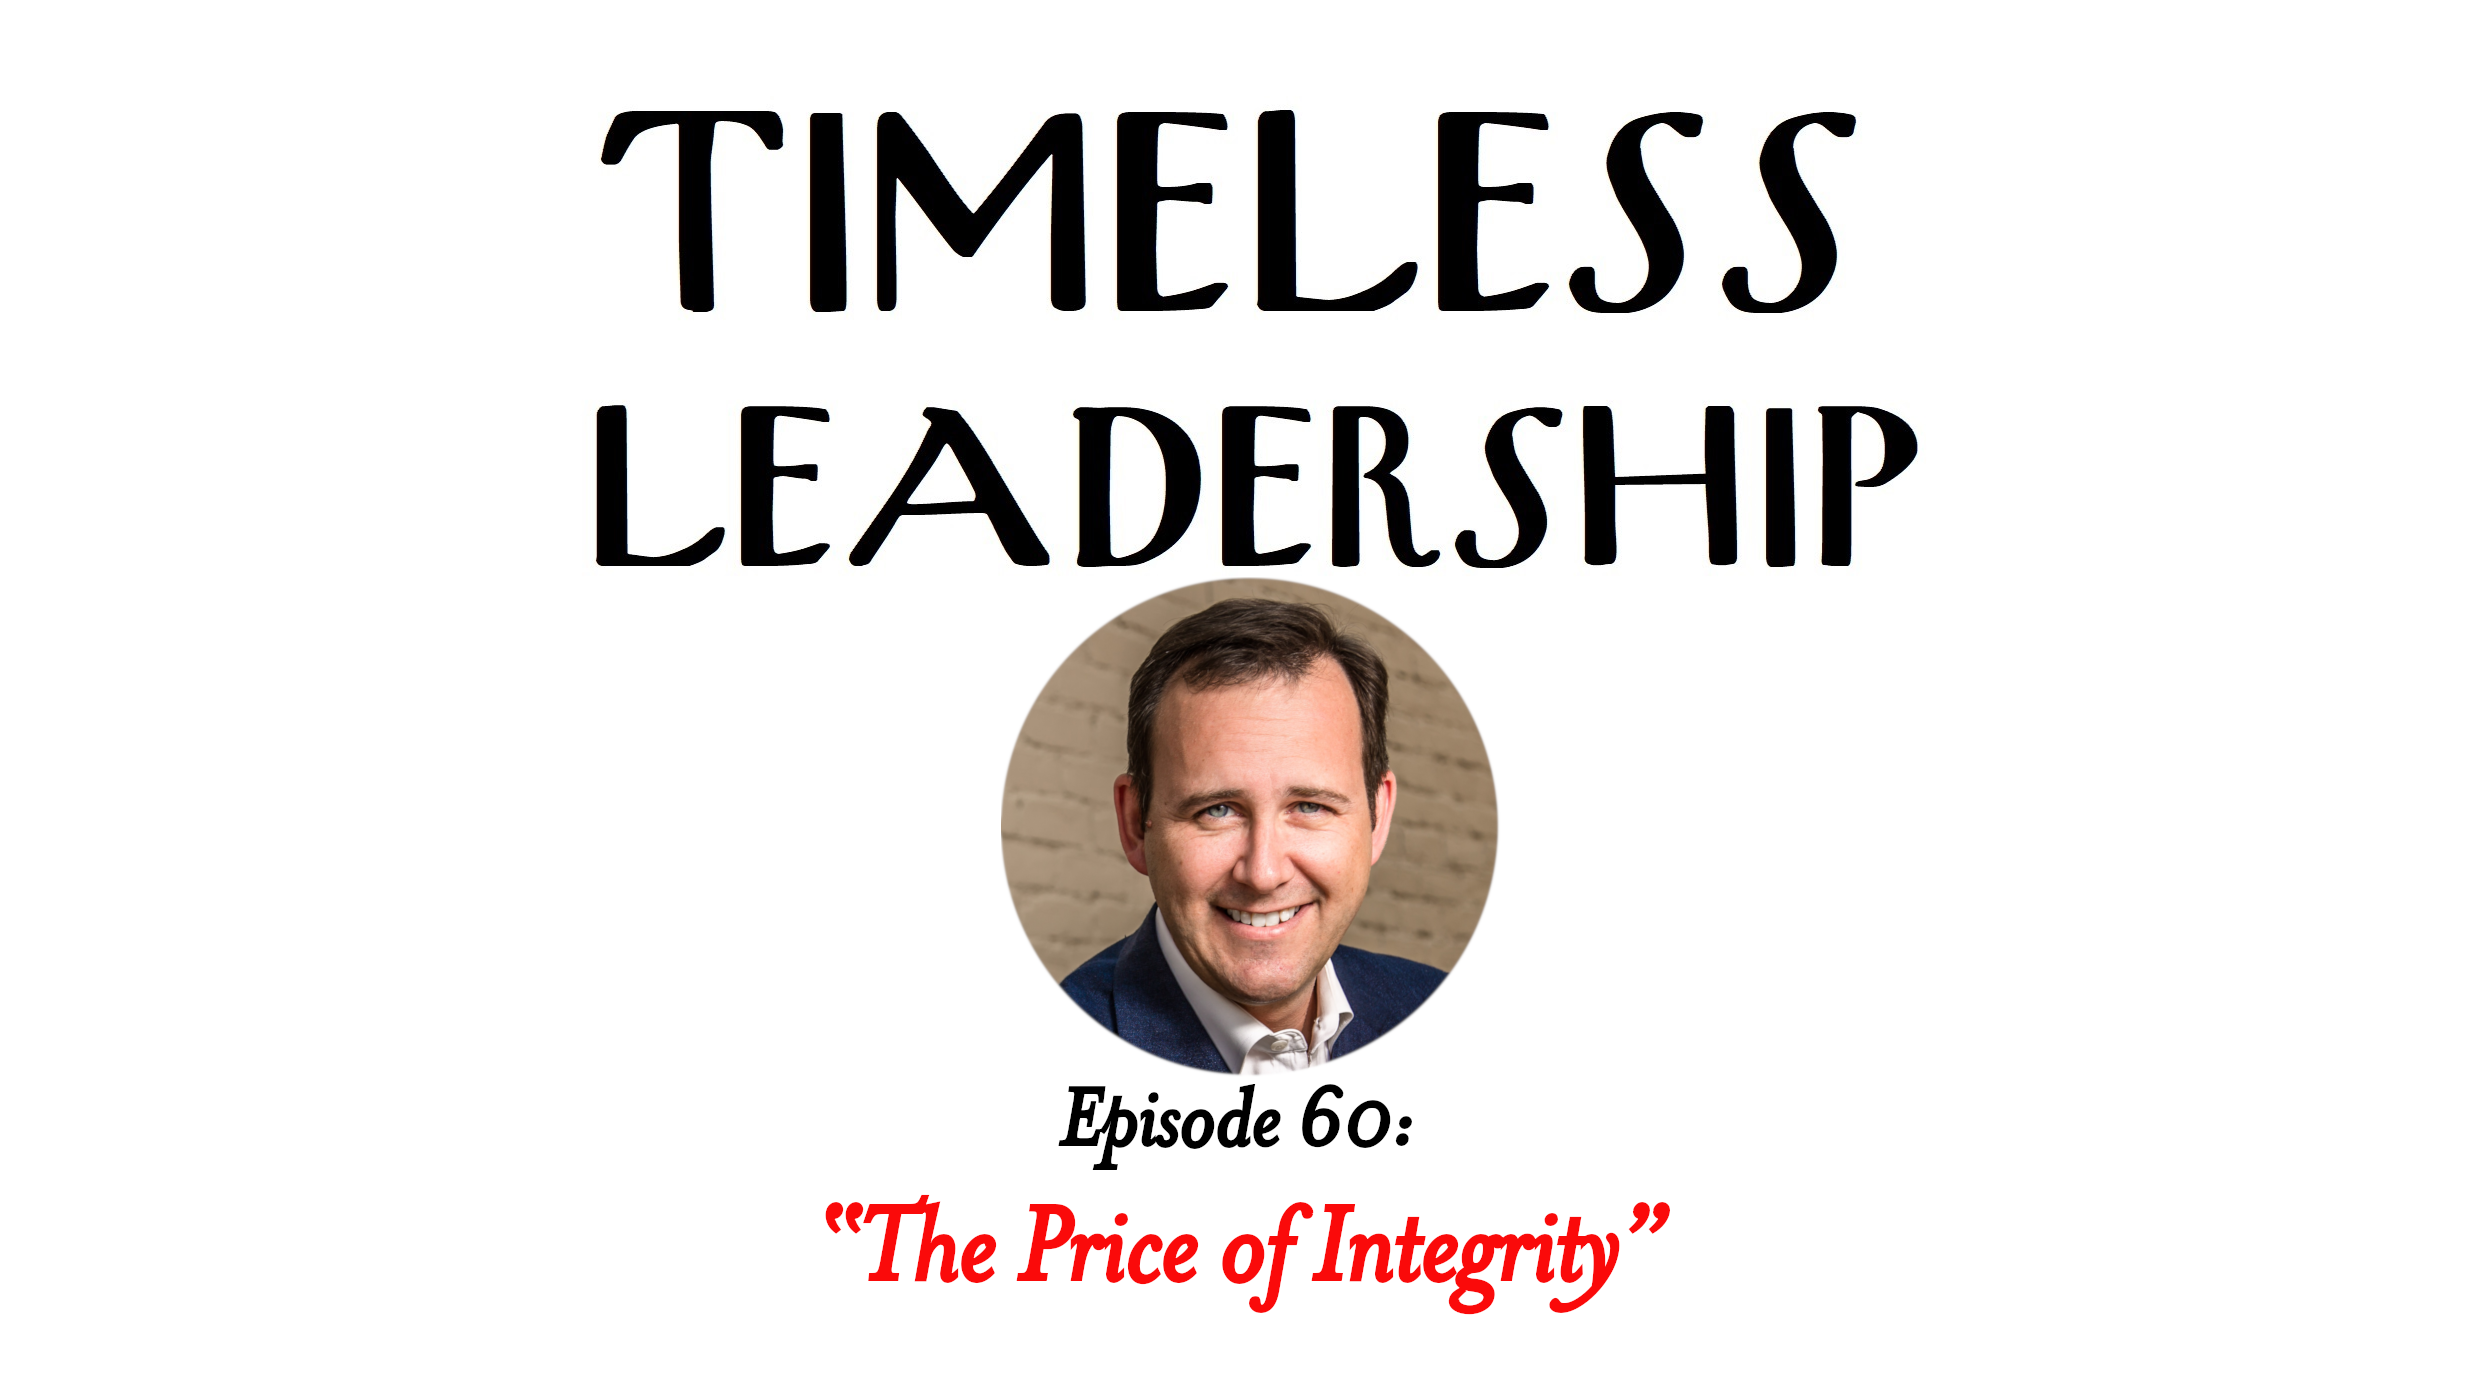 Episode 60: The Price of Integrity